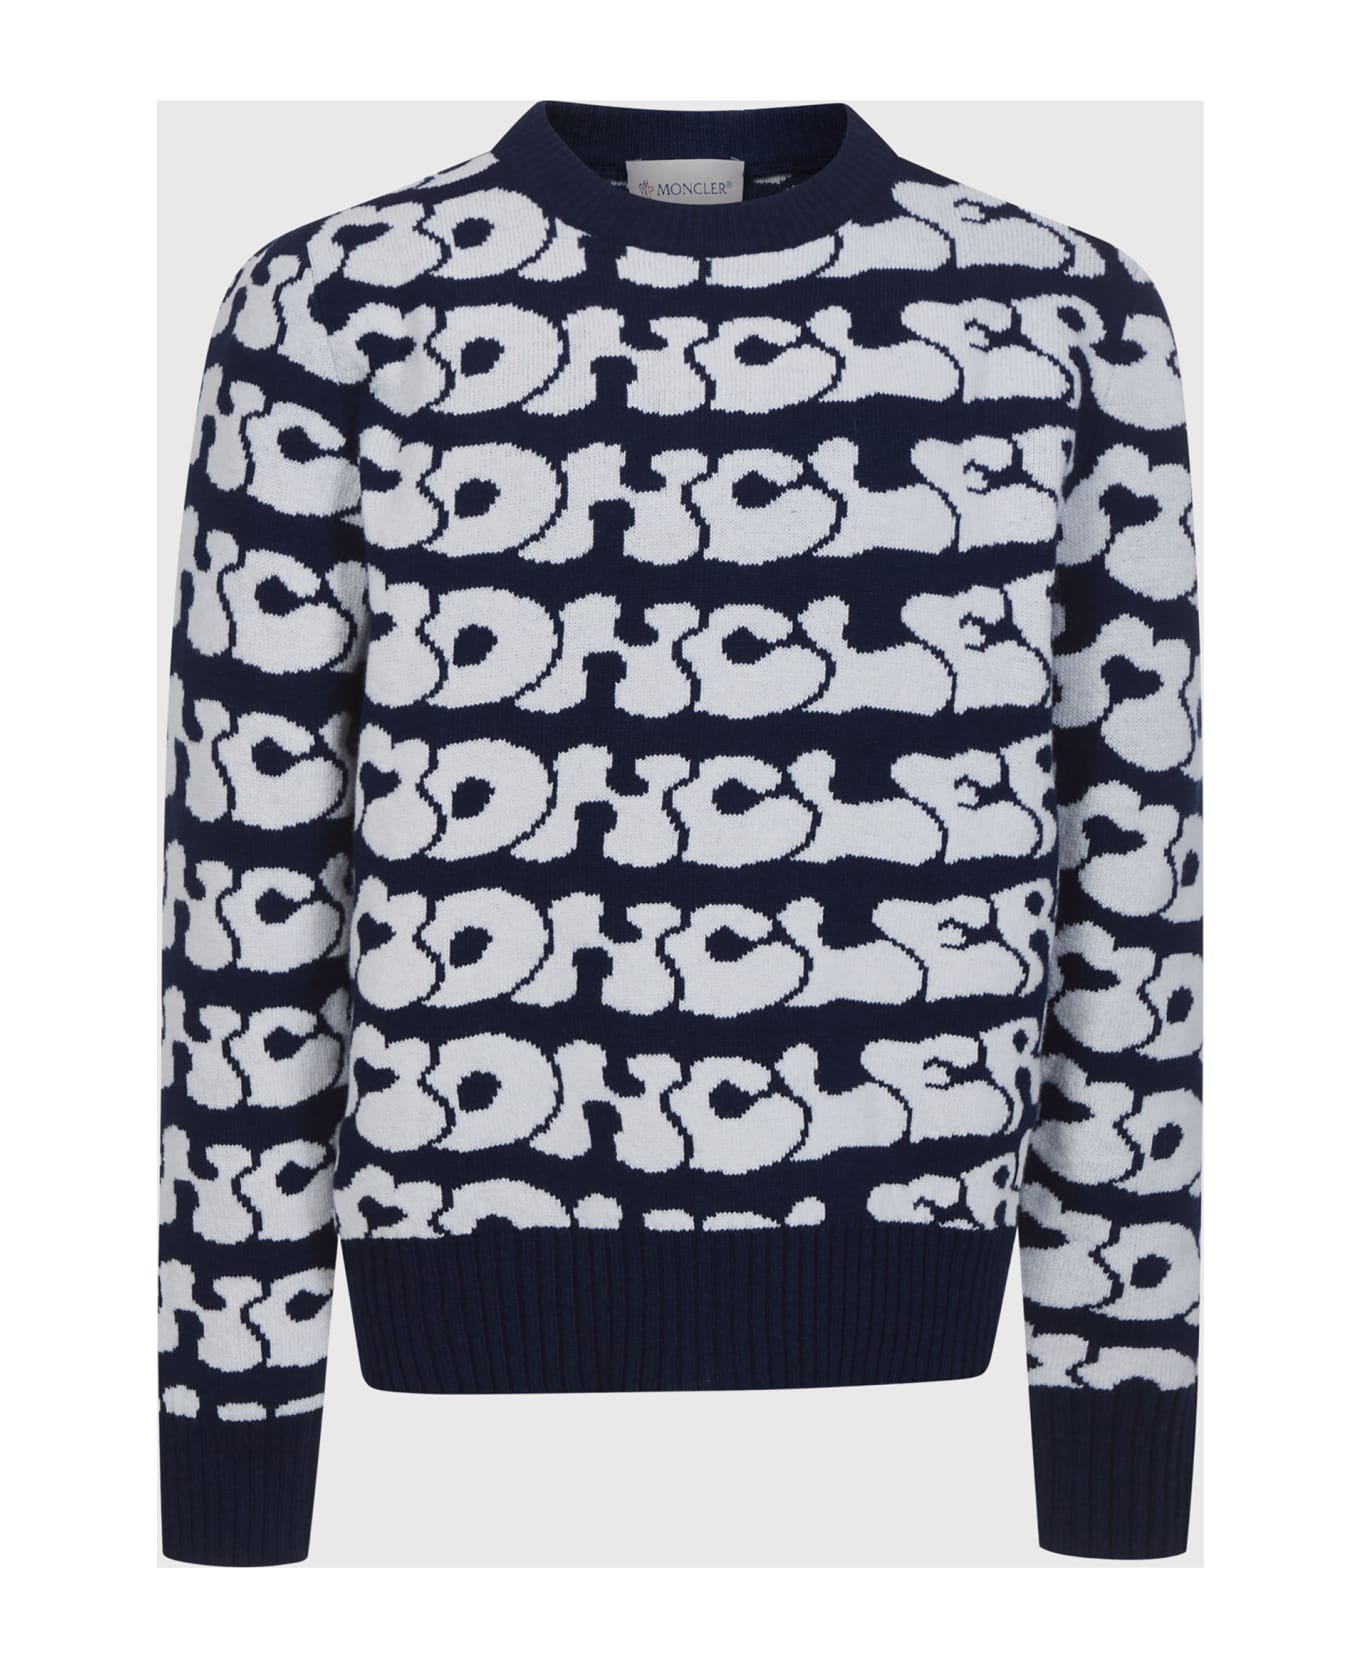 Moncler Sweater - Blue